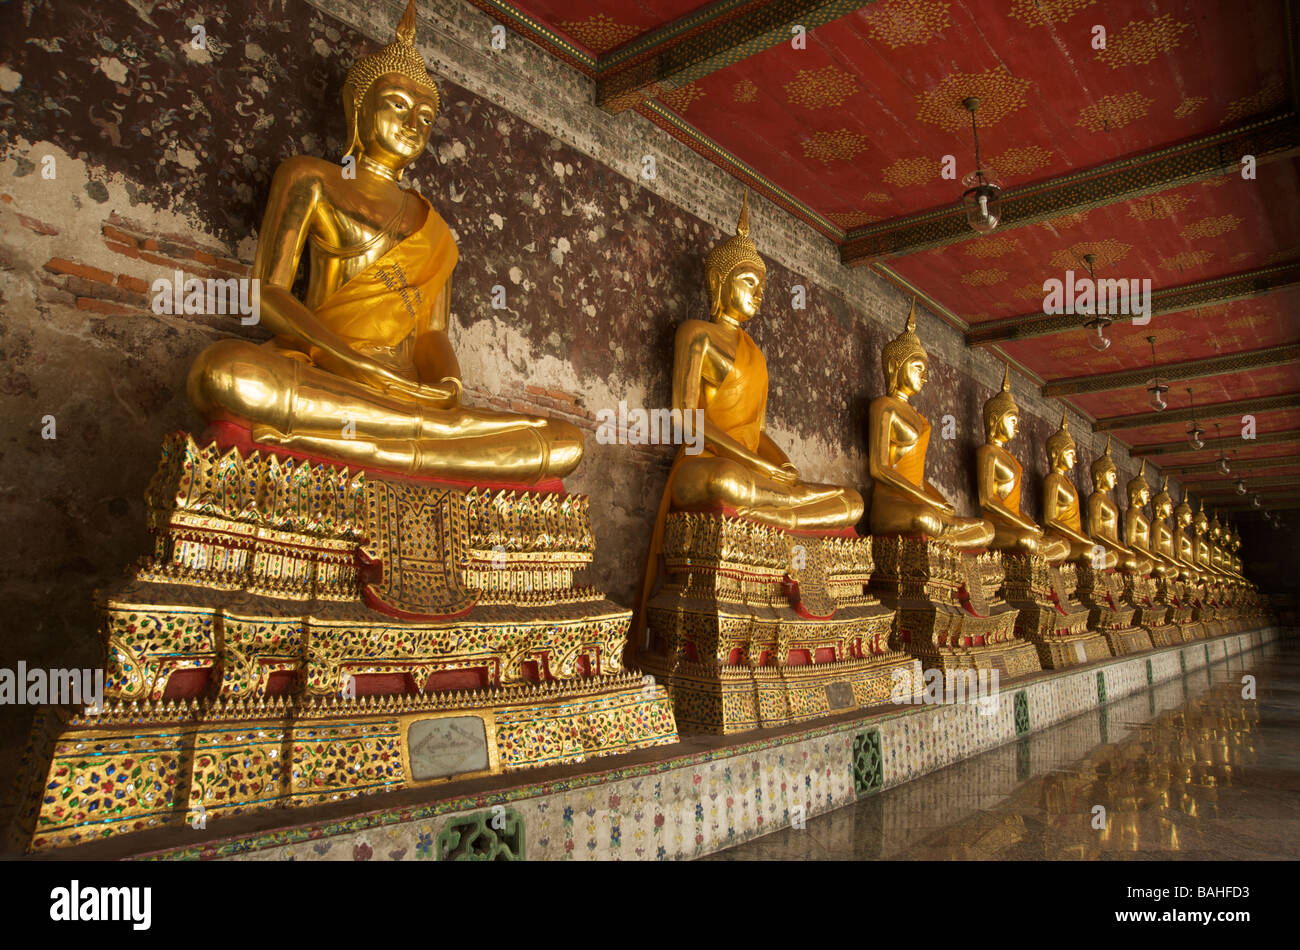 Gold Buddha statues line the galleries that encircle the main building at Wat Suthat in Bangkok Thailand Stock Photo